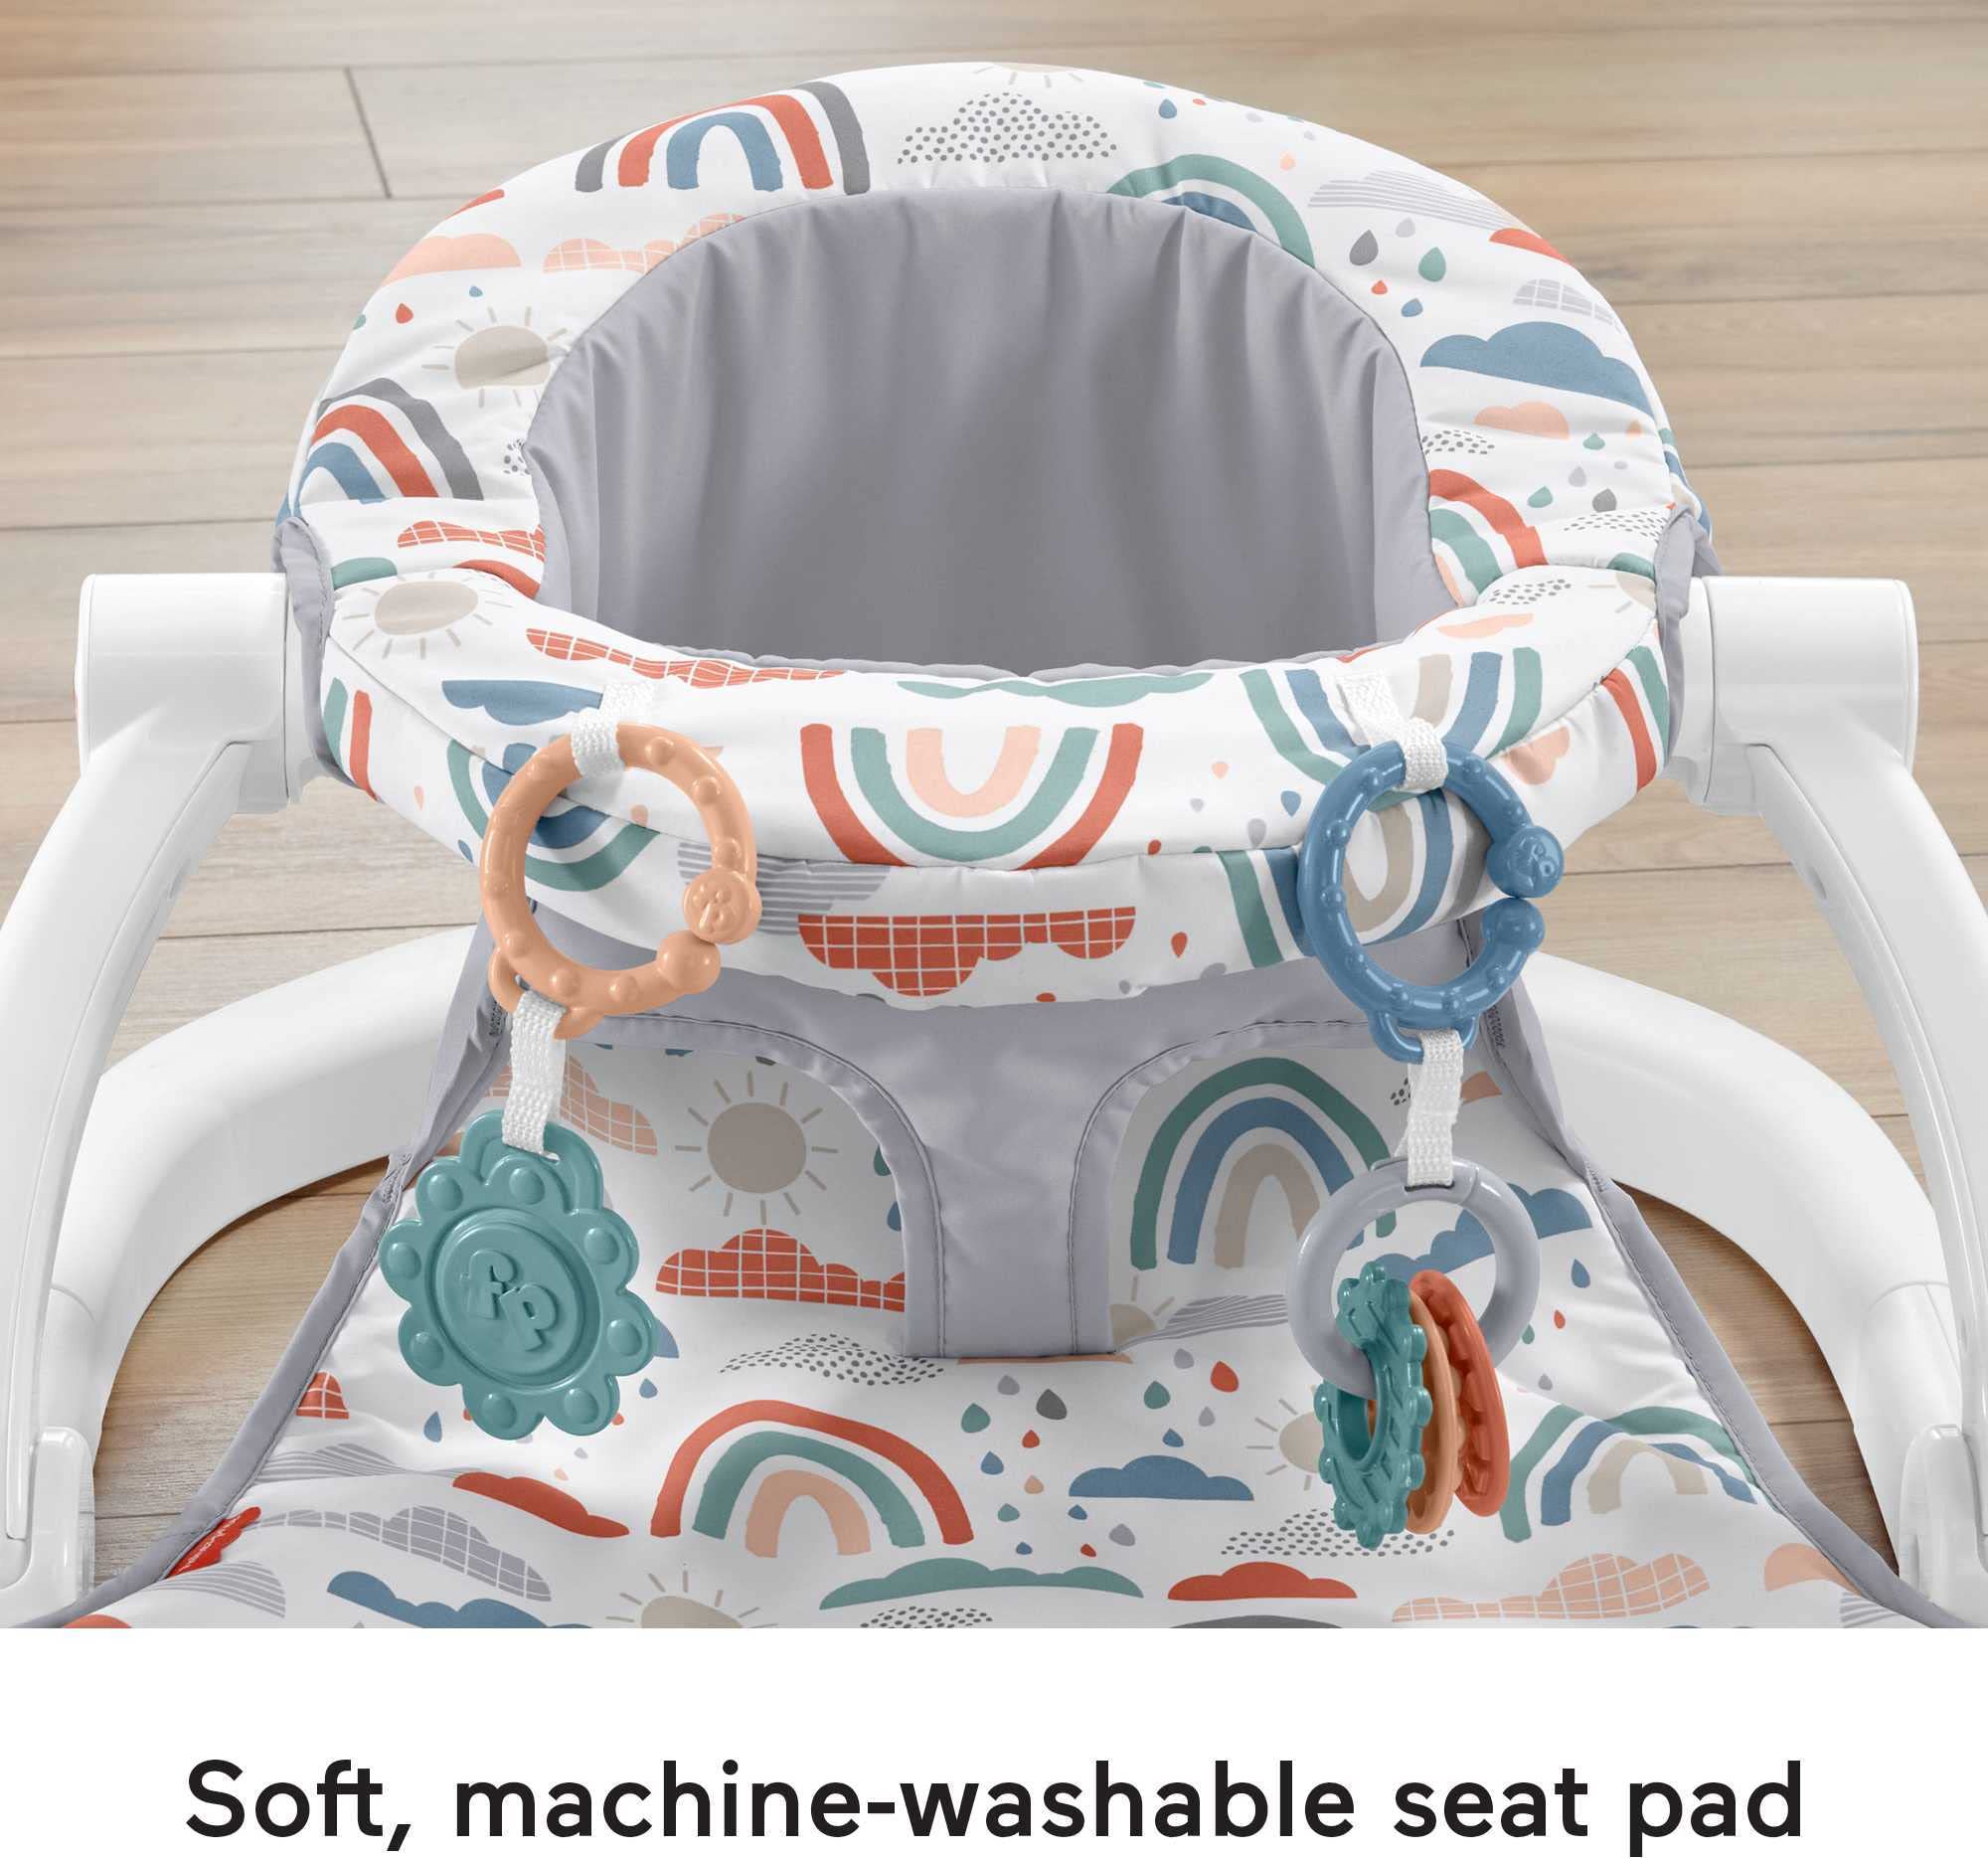 Fisher-Price Portable Baby Chair Sit-Me-Up Floor Seat with 2 Developmental Toys, Rainbow Showers